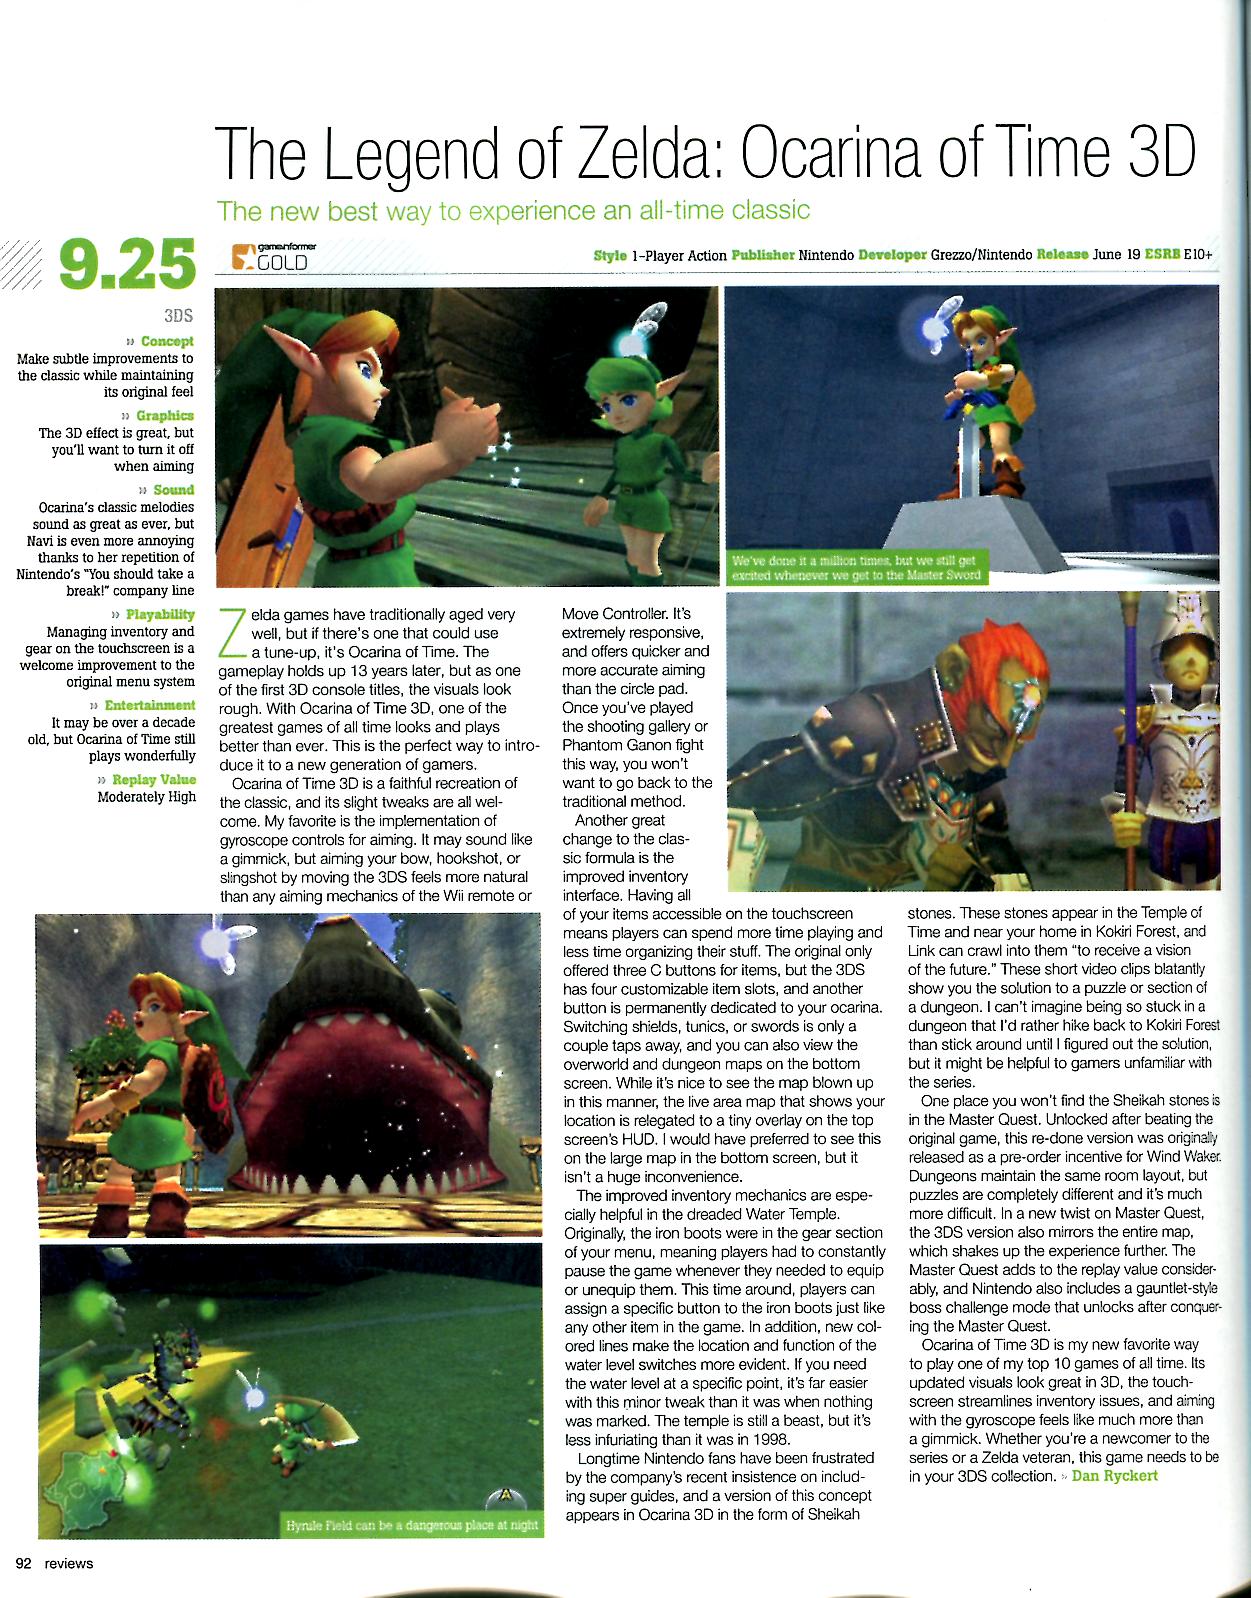 The Legend of Zelda: Ocarina of Time 3D Review - The New Best Way